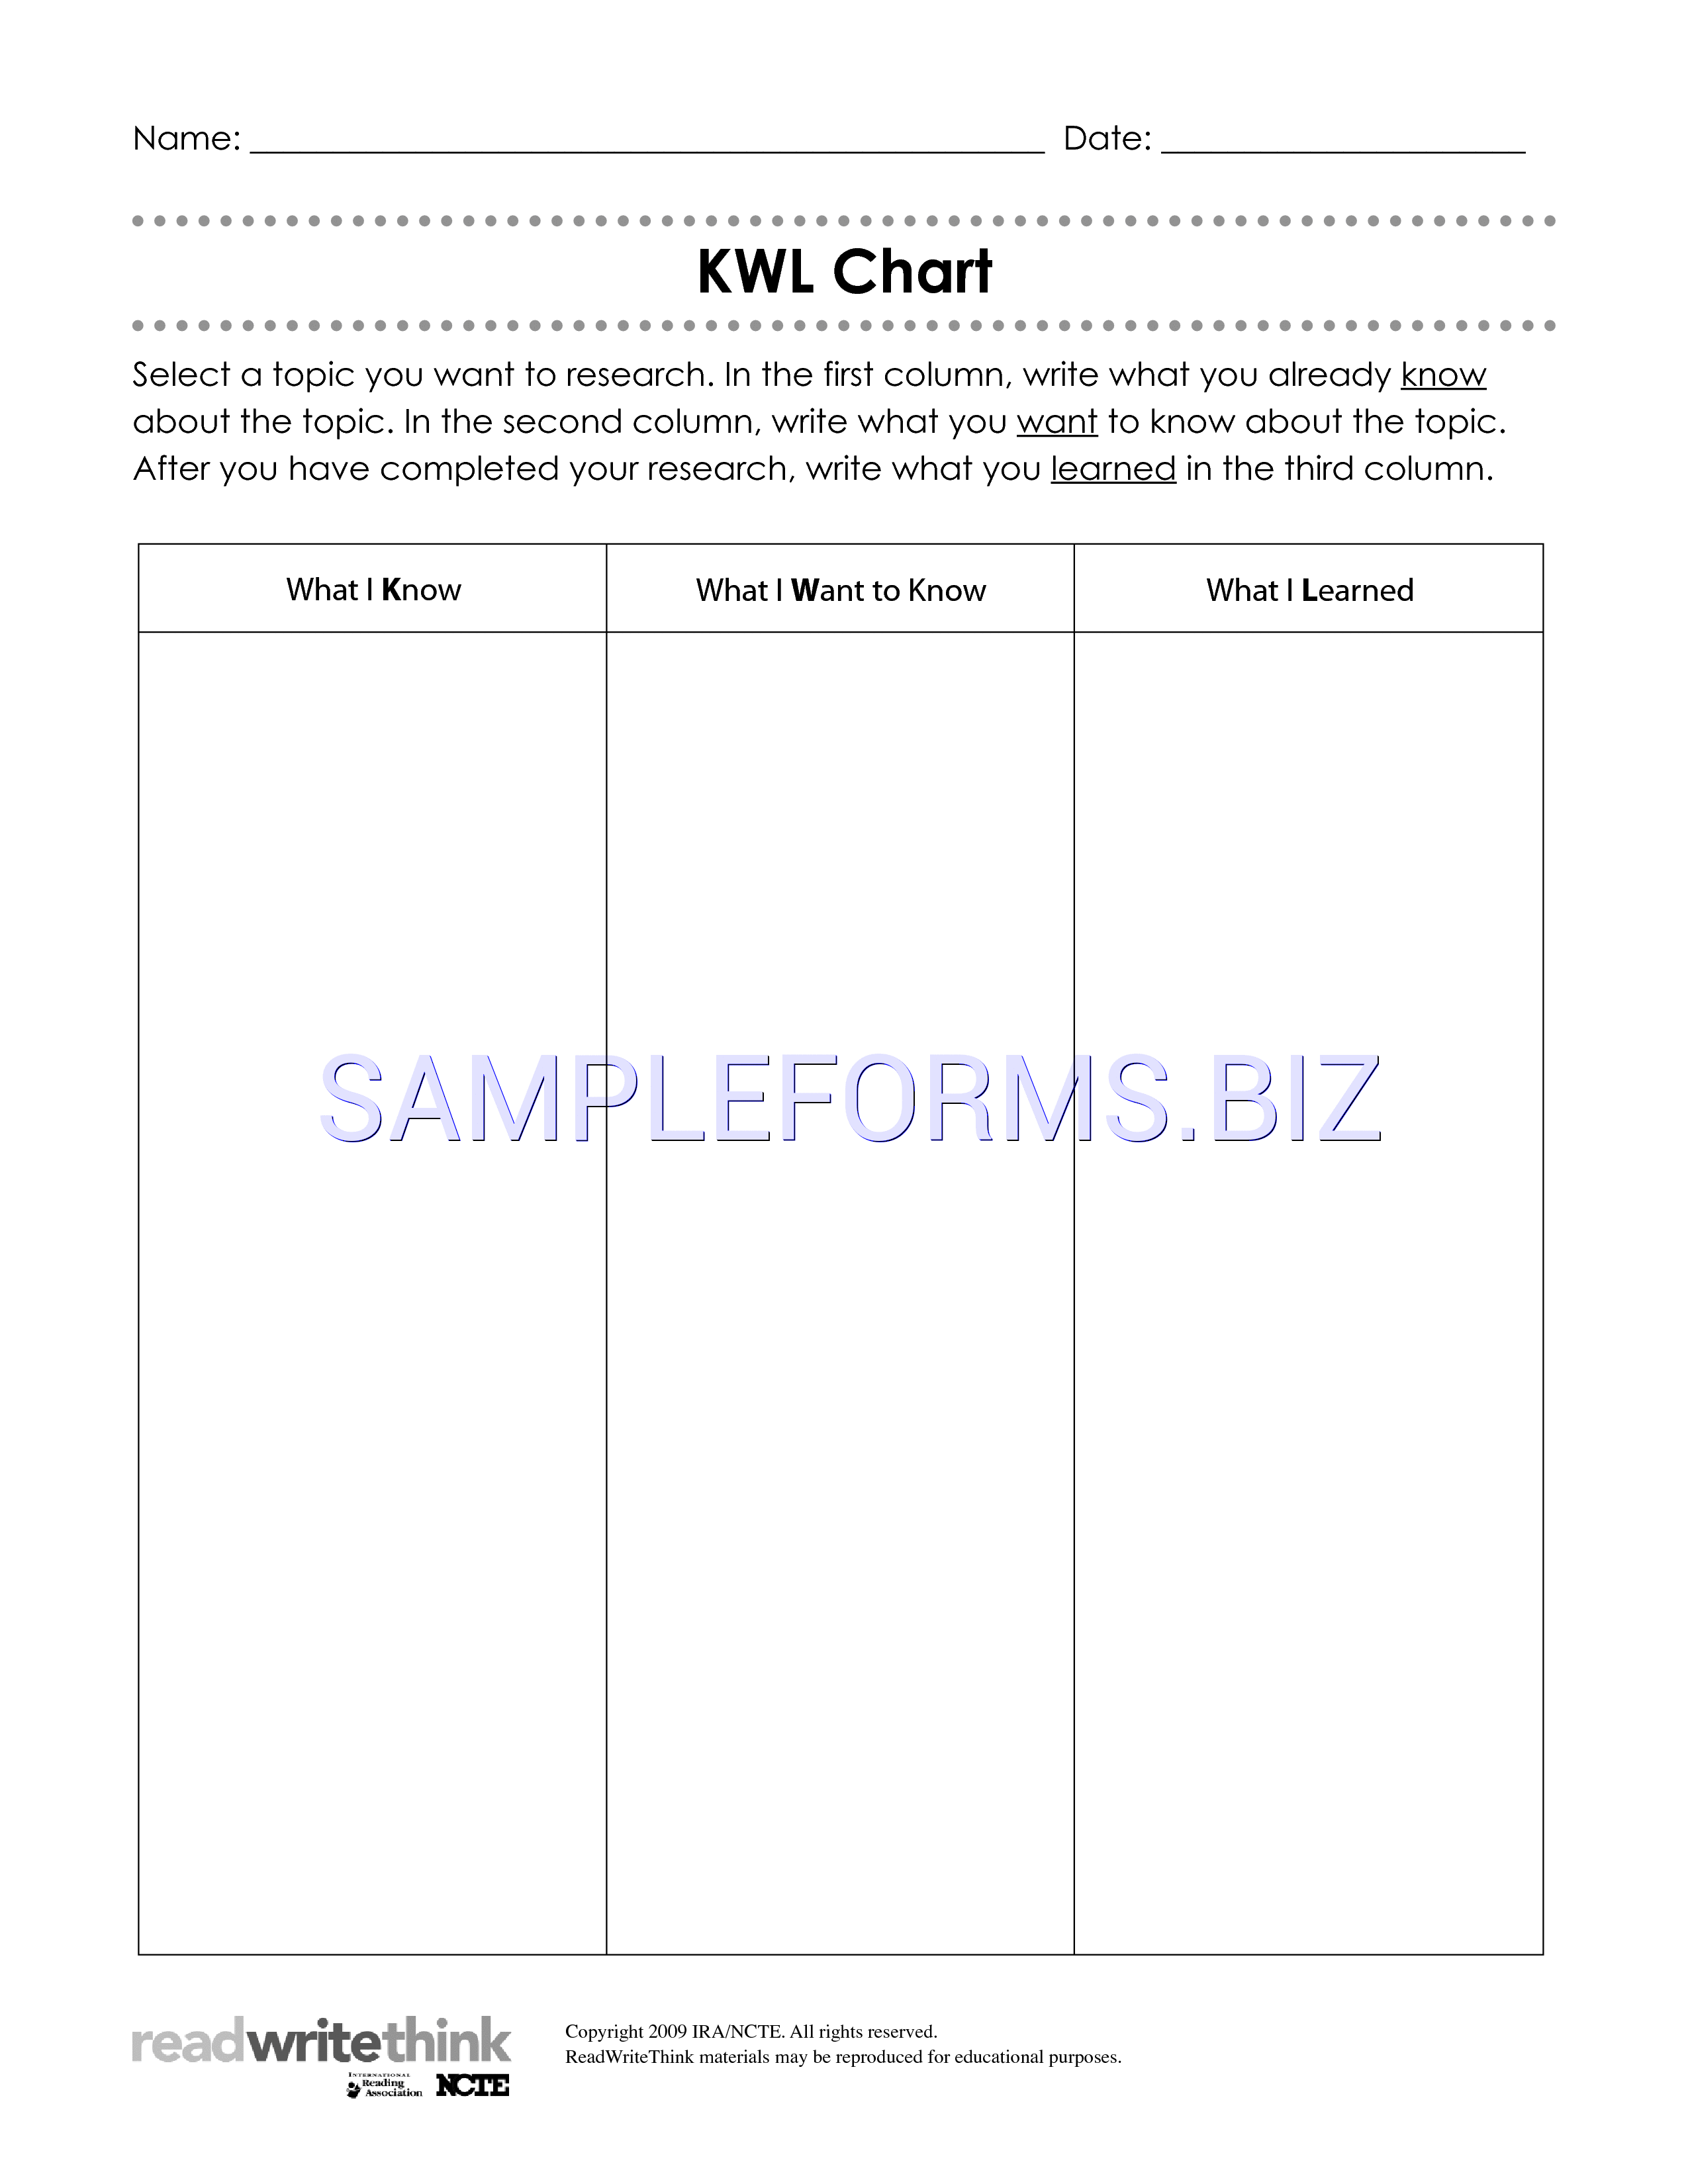 Preview free downloadable KWL Chart 1 in PDF (page 1)